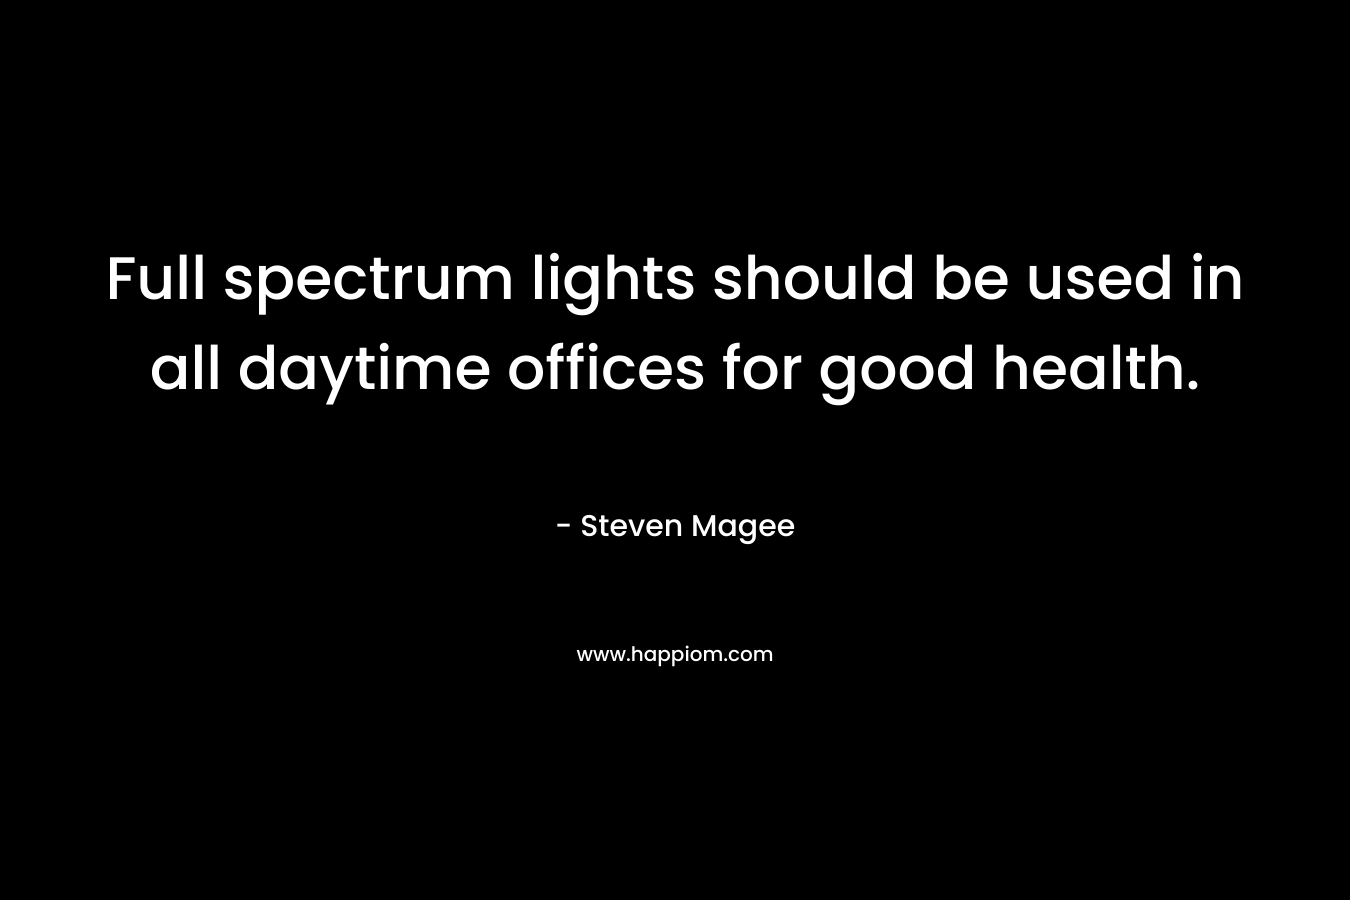 Full spectrum lights should be used in all daytime offices for good health. – Steven Magee